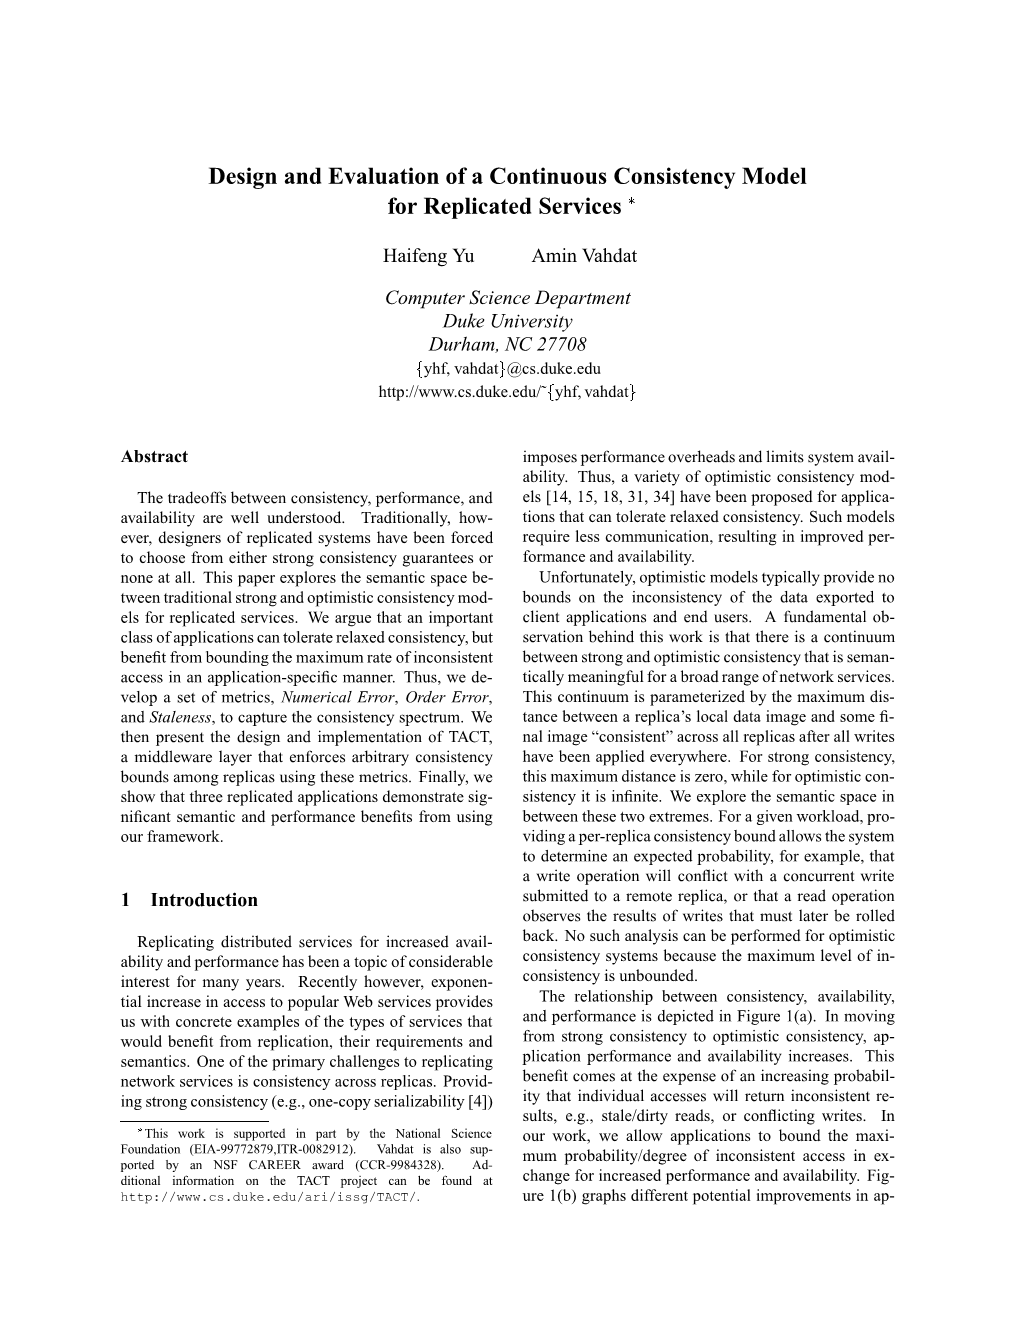 Design and Evaluation of a Continuous Consistency Model For